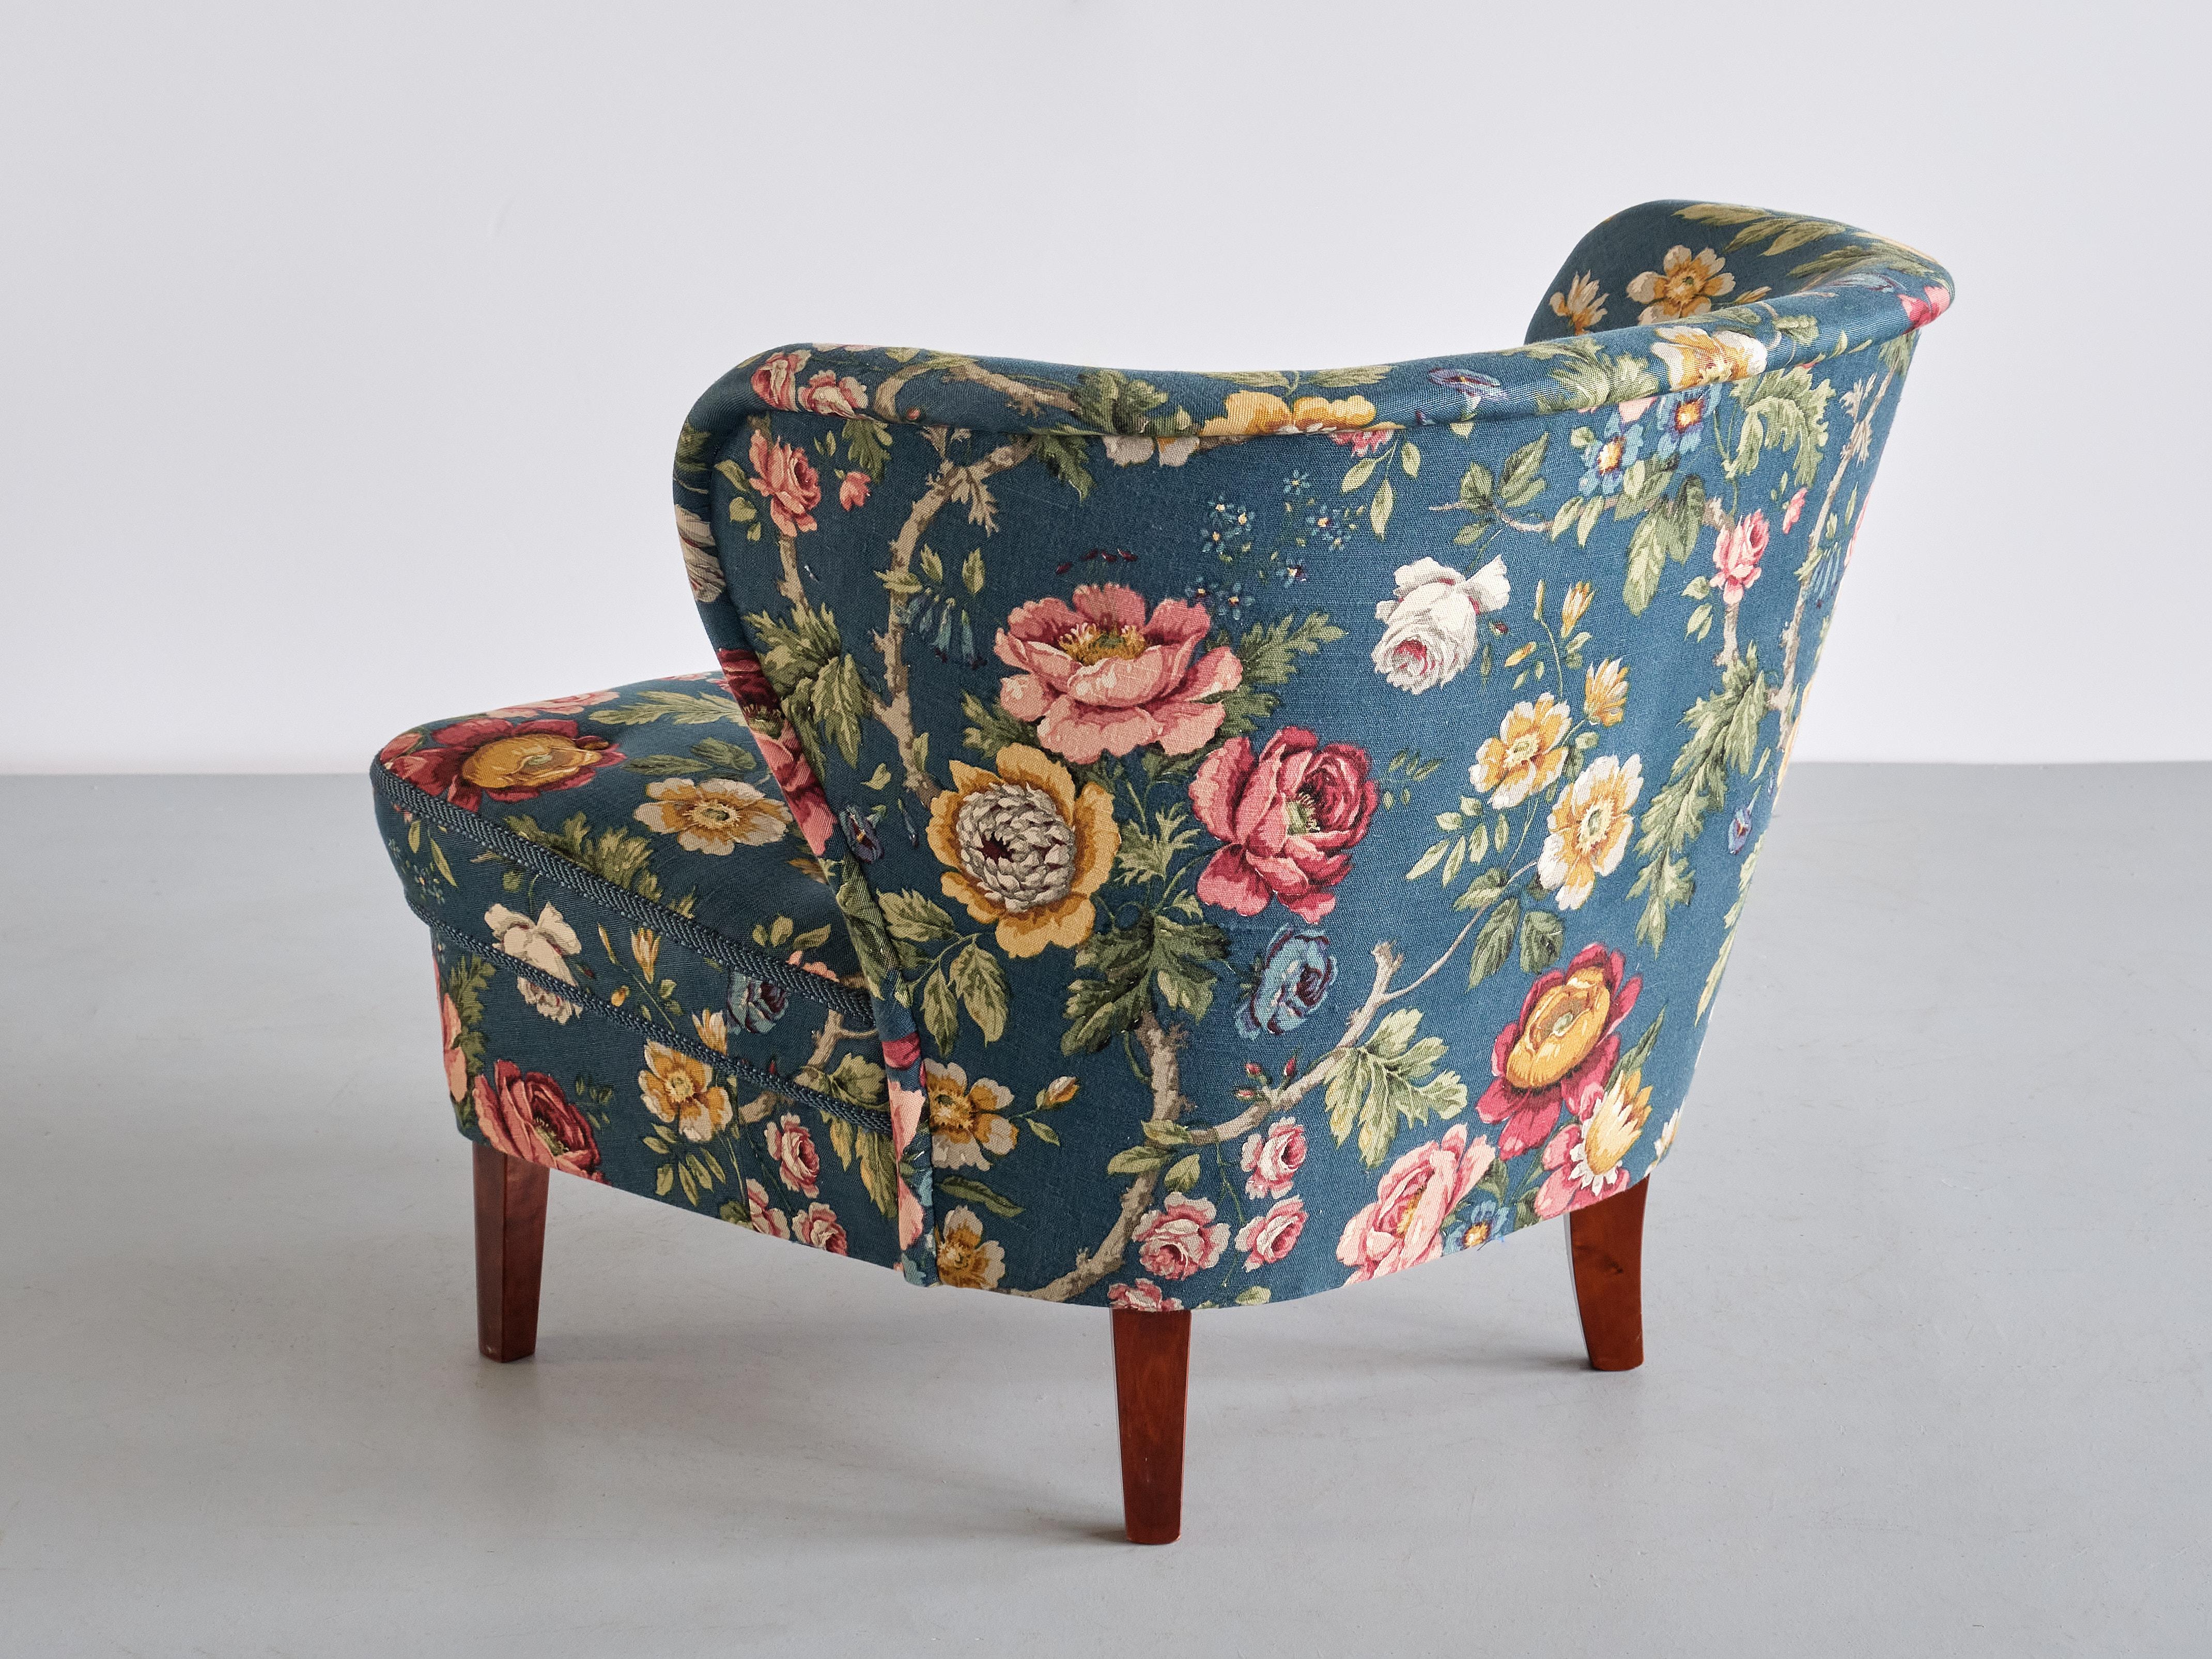 Gösta Jonsson Lounge Chair in Floral Fabric and Birch, Sweden, 1940s For Sale 4